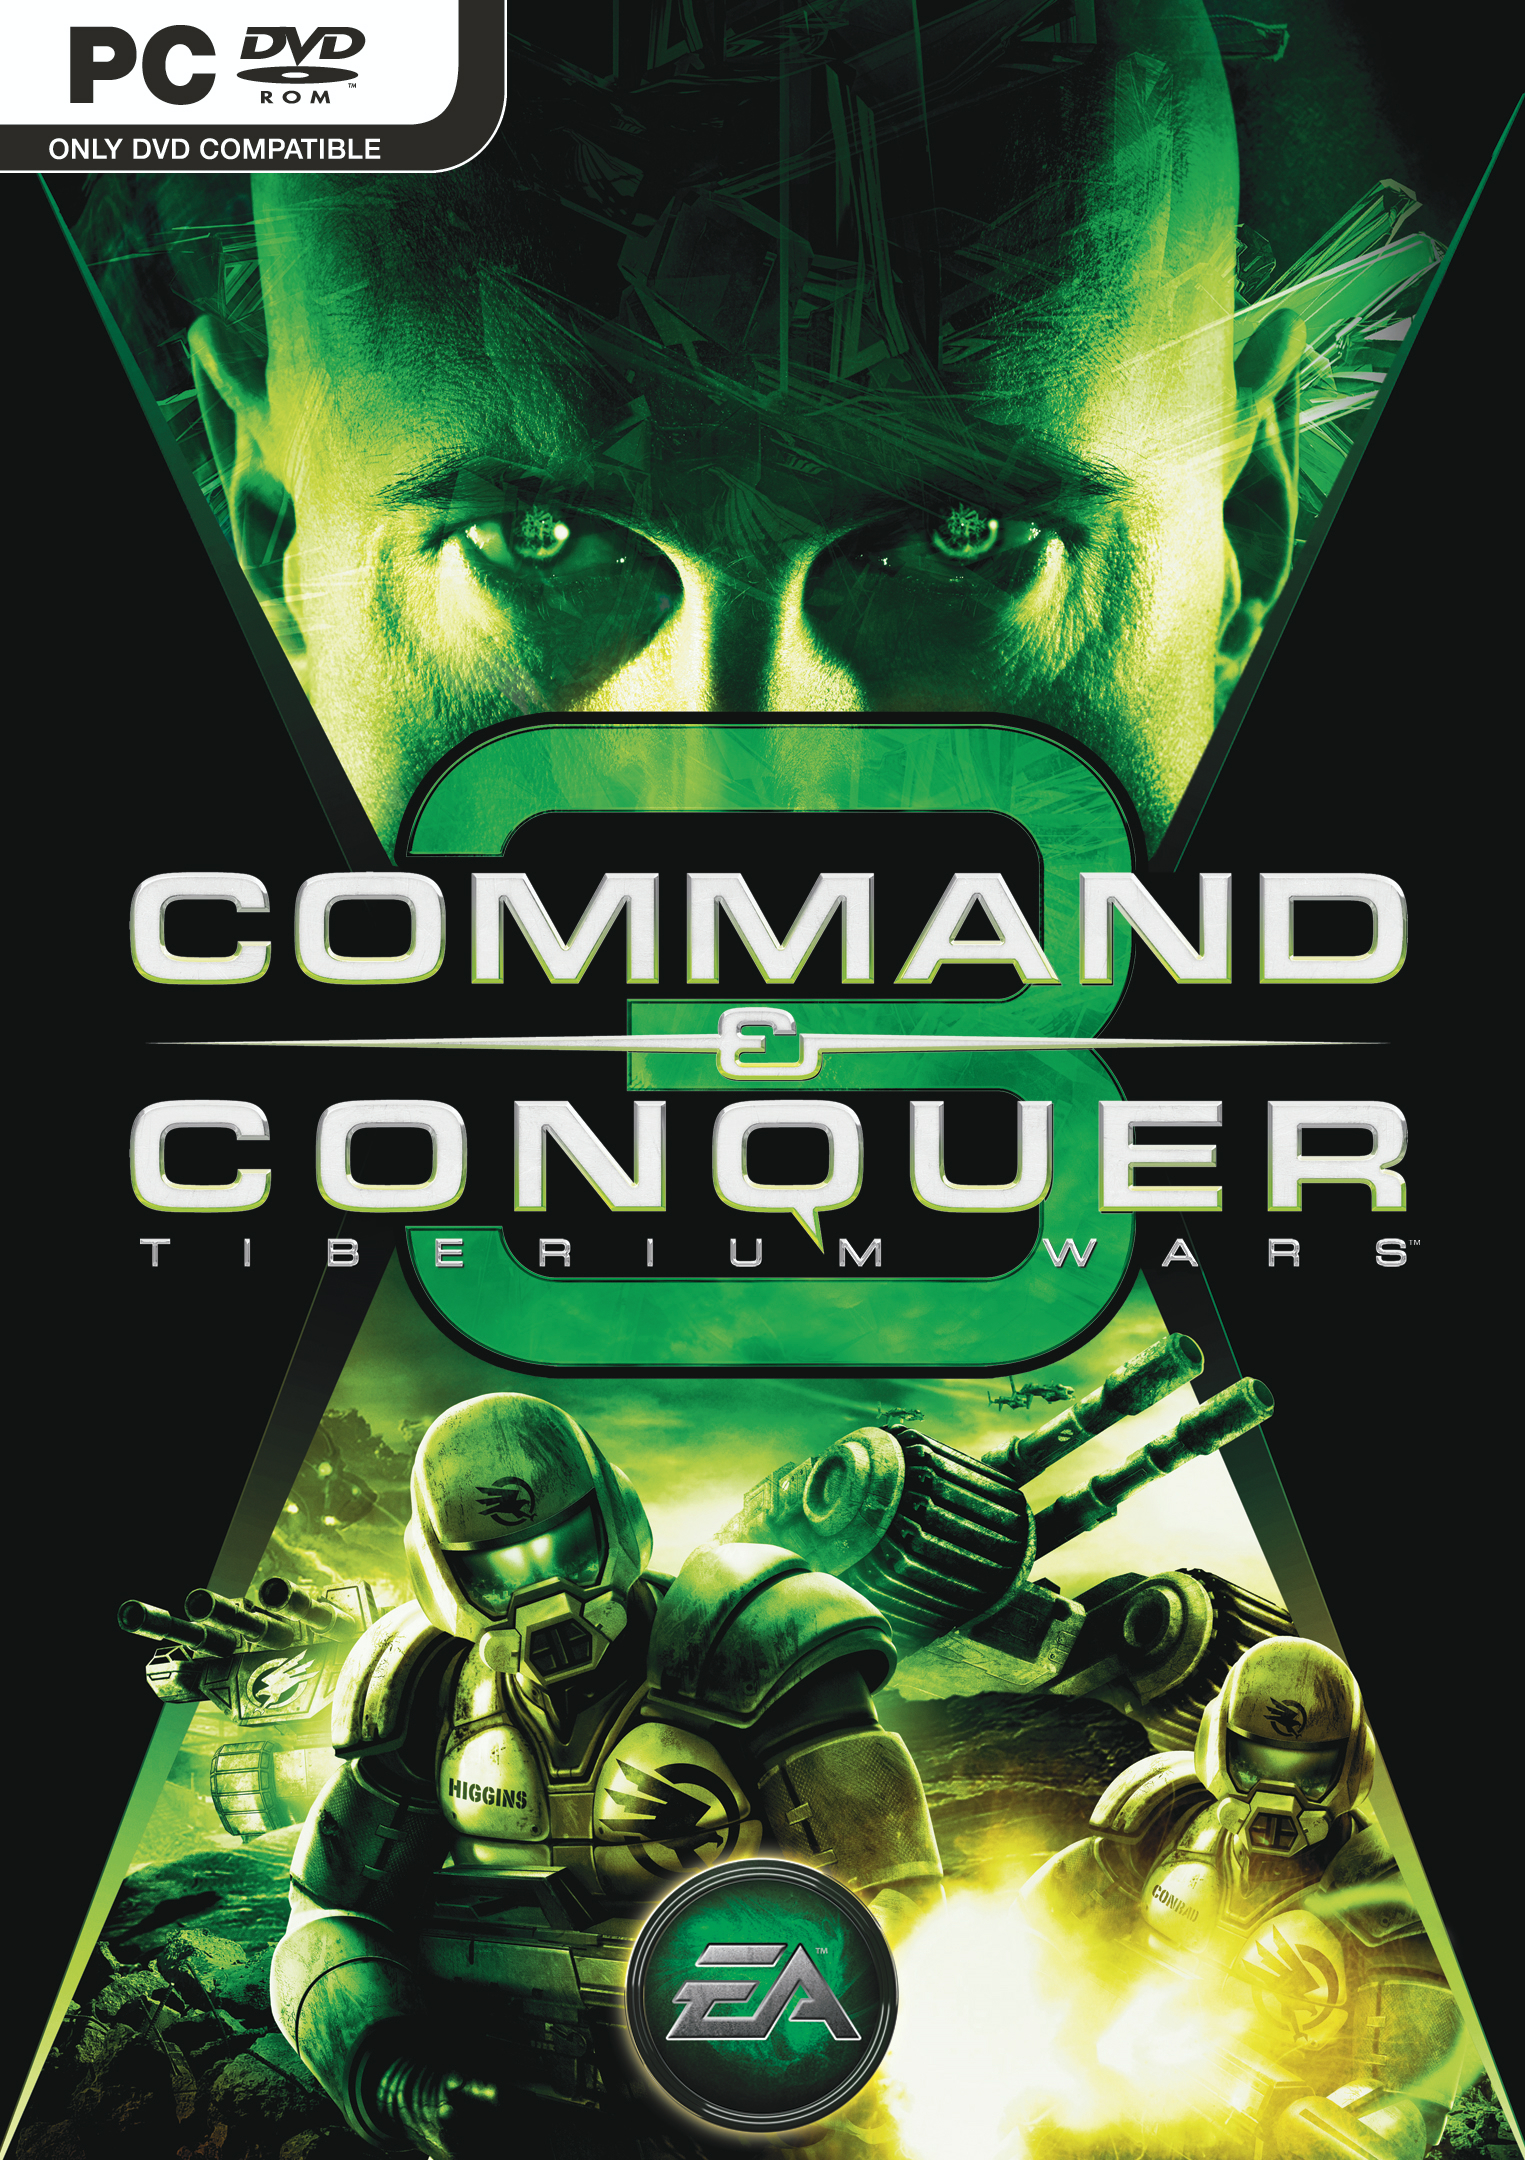 my computer wont open up command and conquer 3 kanes wrath world builder